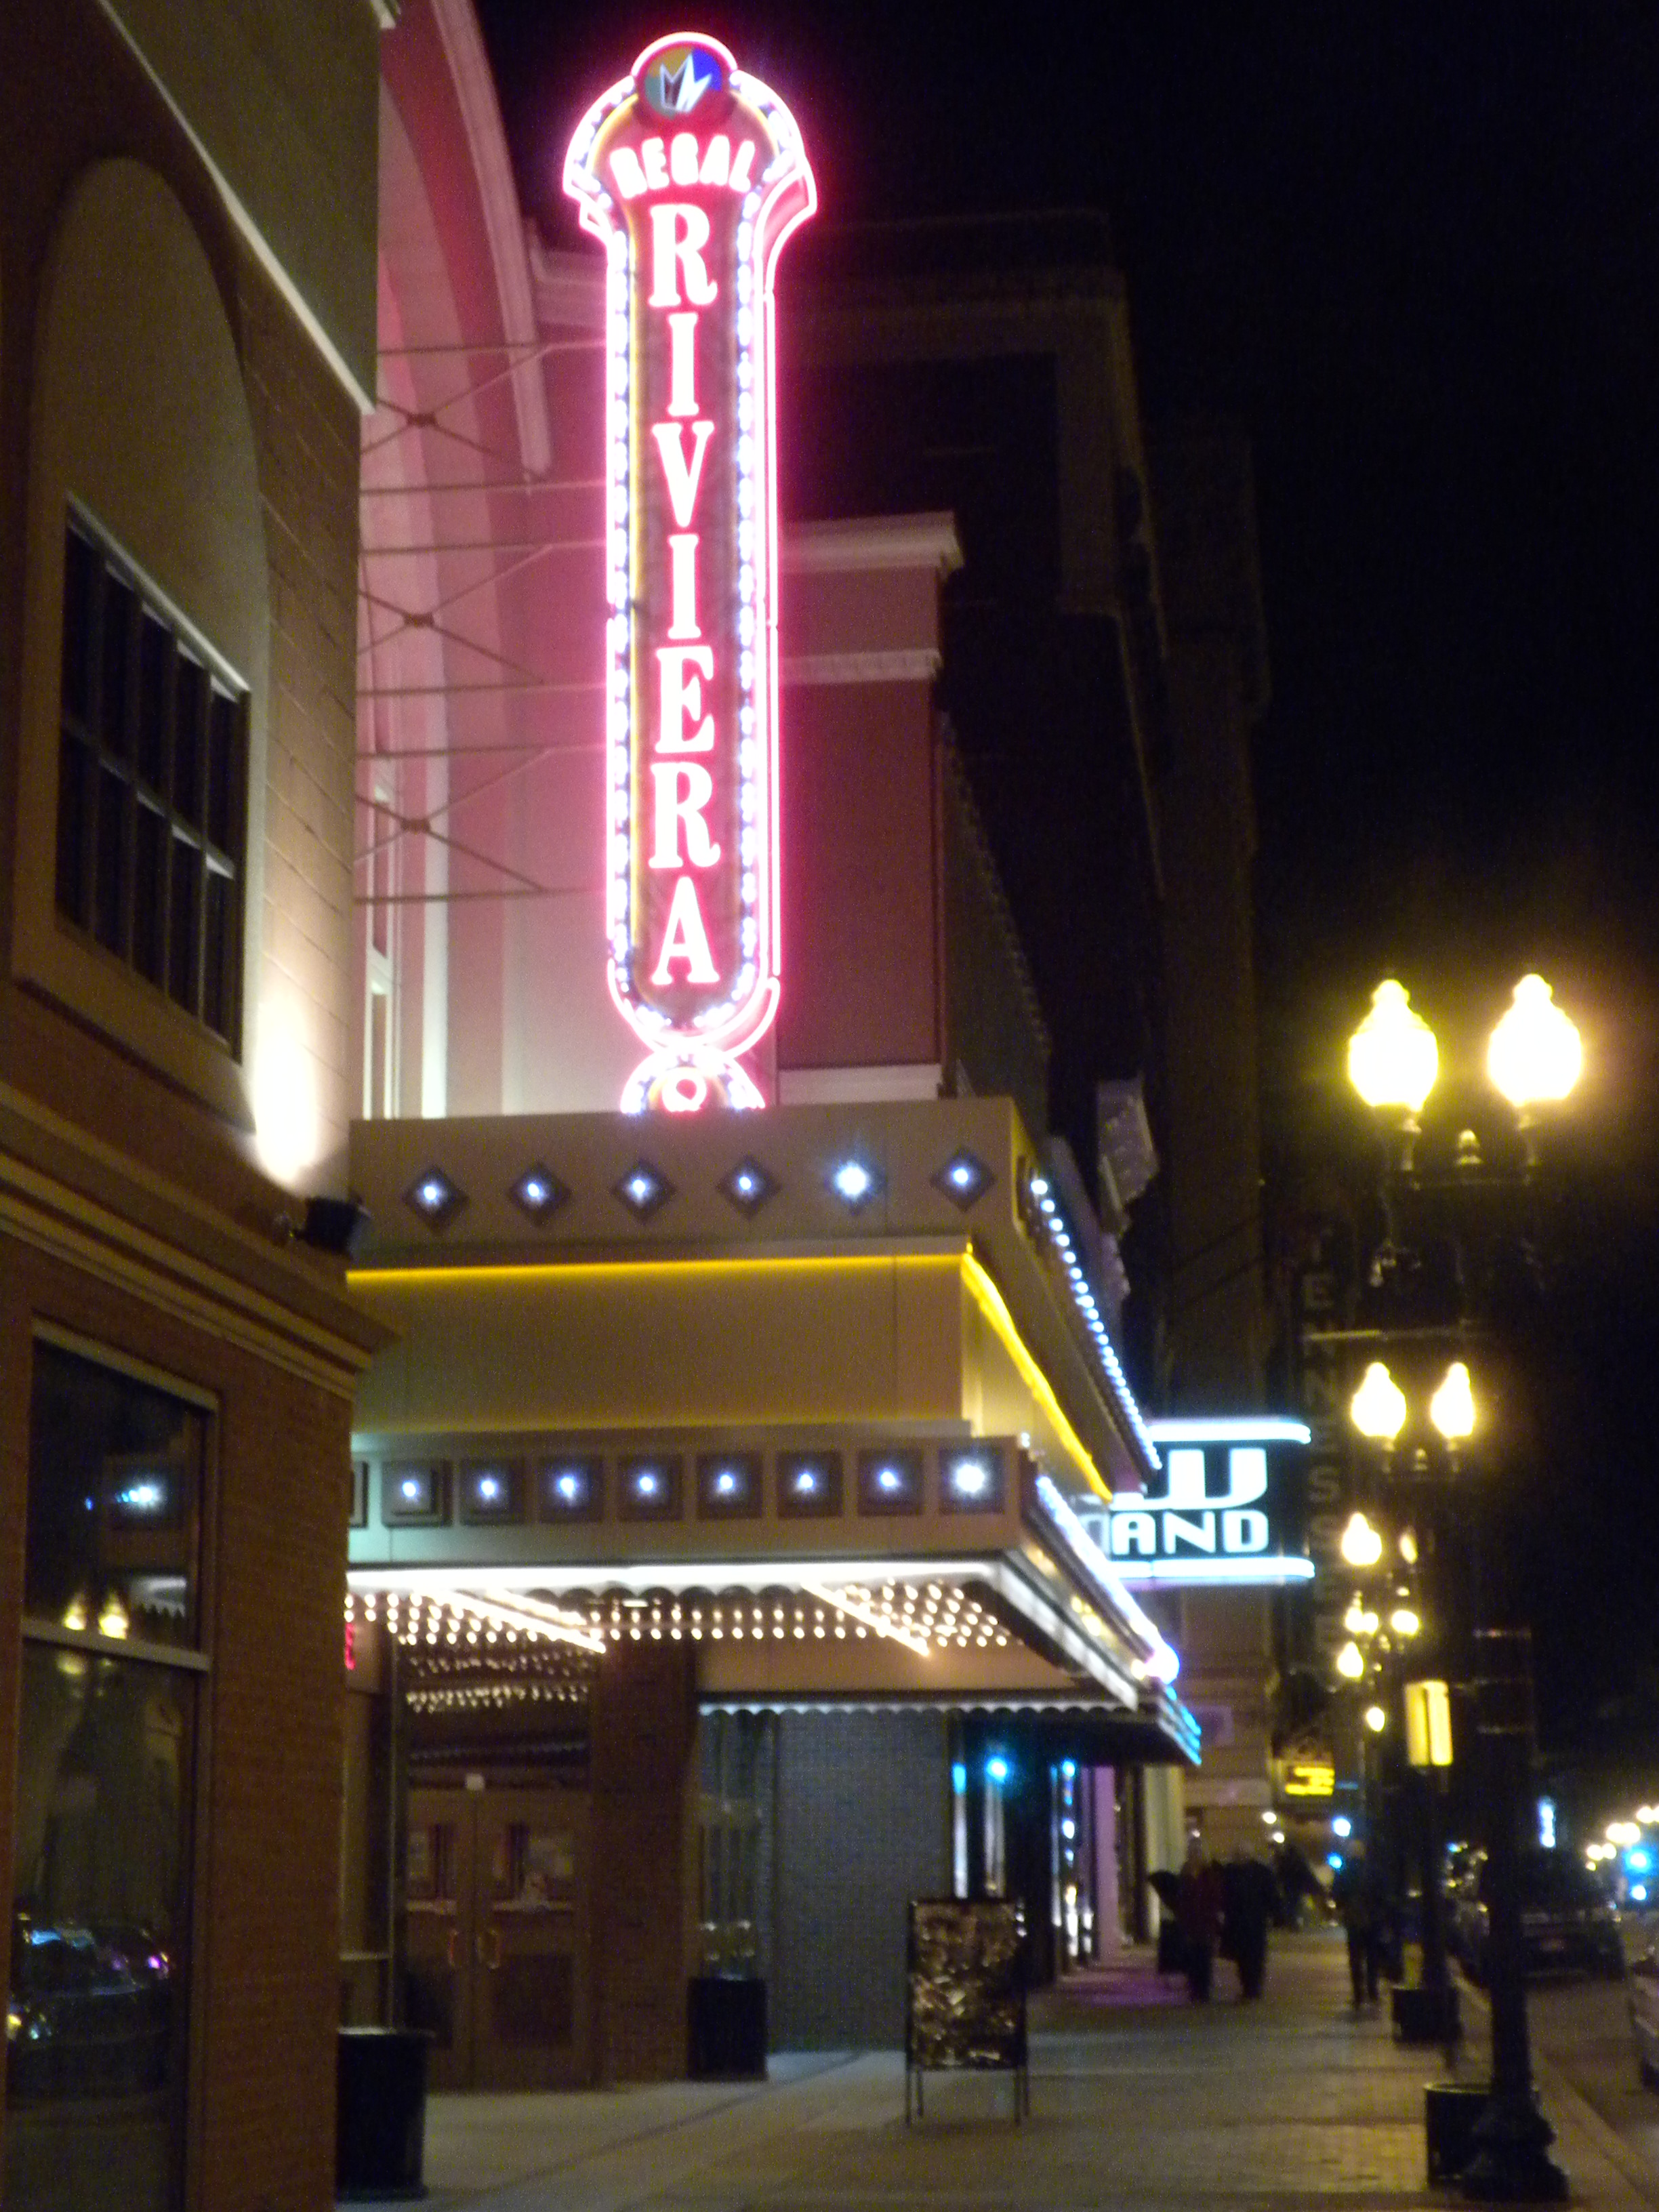 Movie Listings At The Swamp Fox Cinema In Florence South Carolina 118